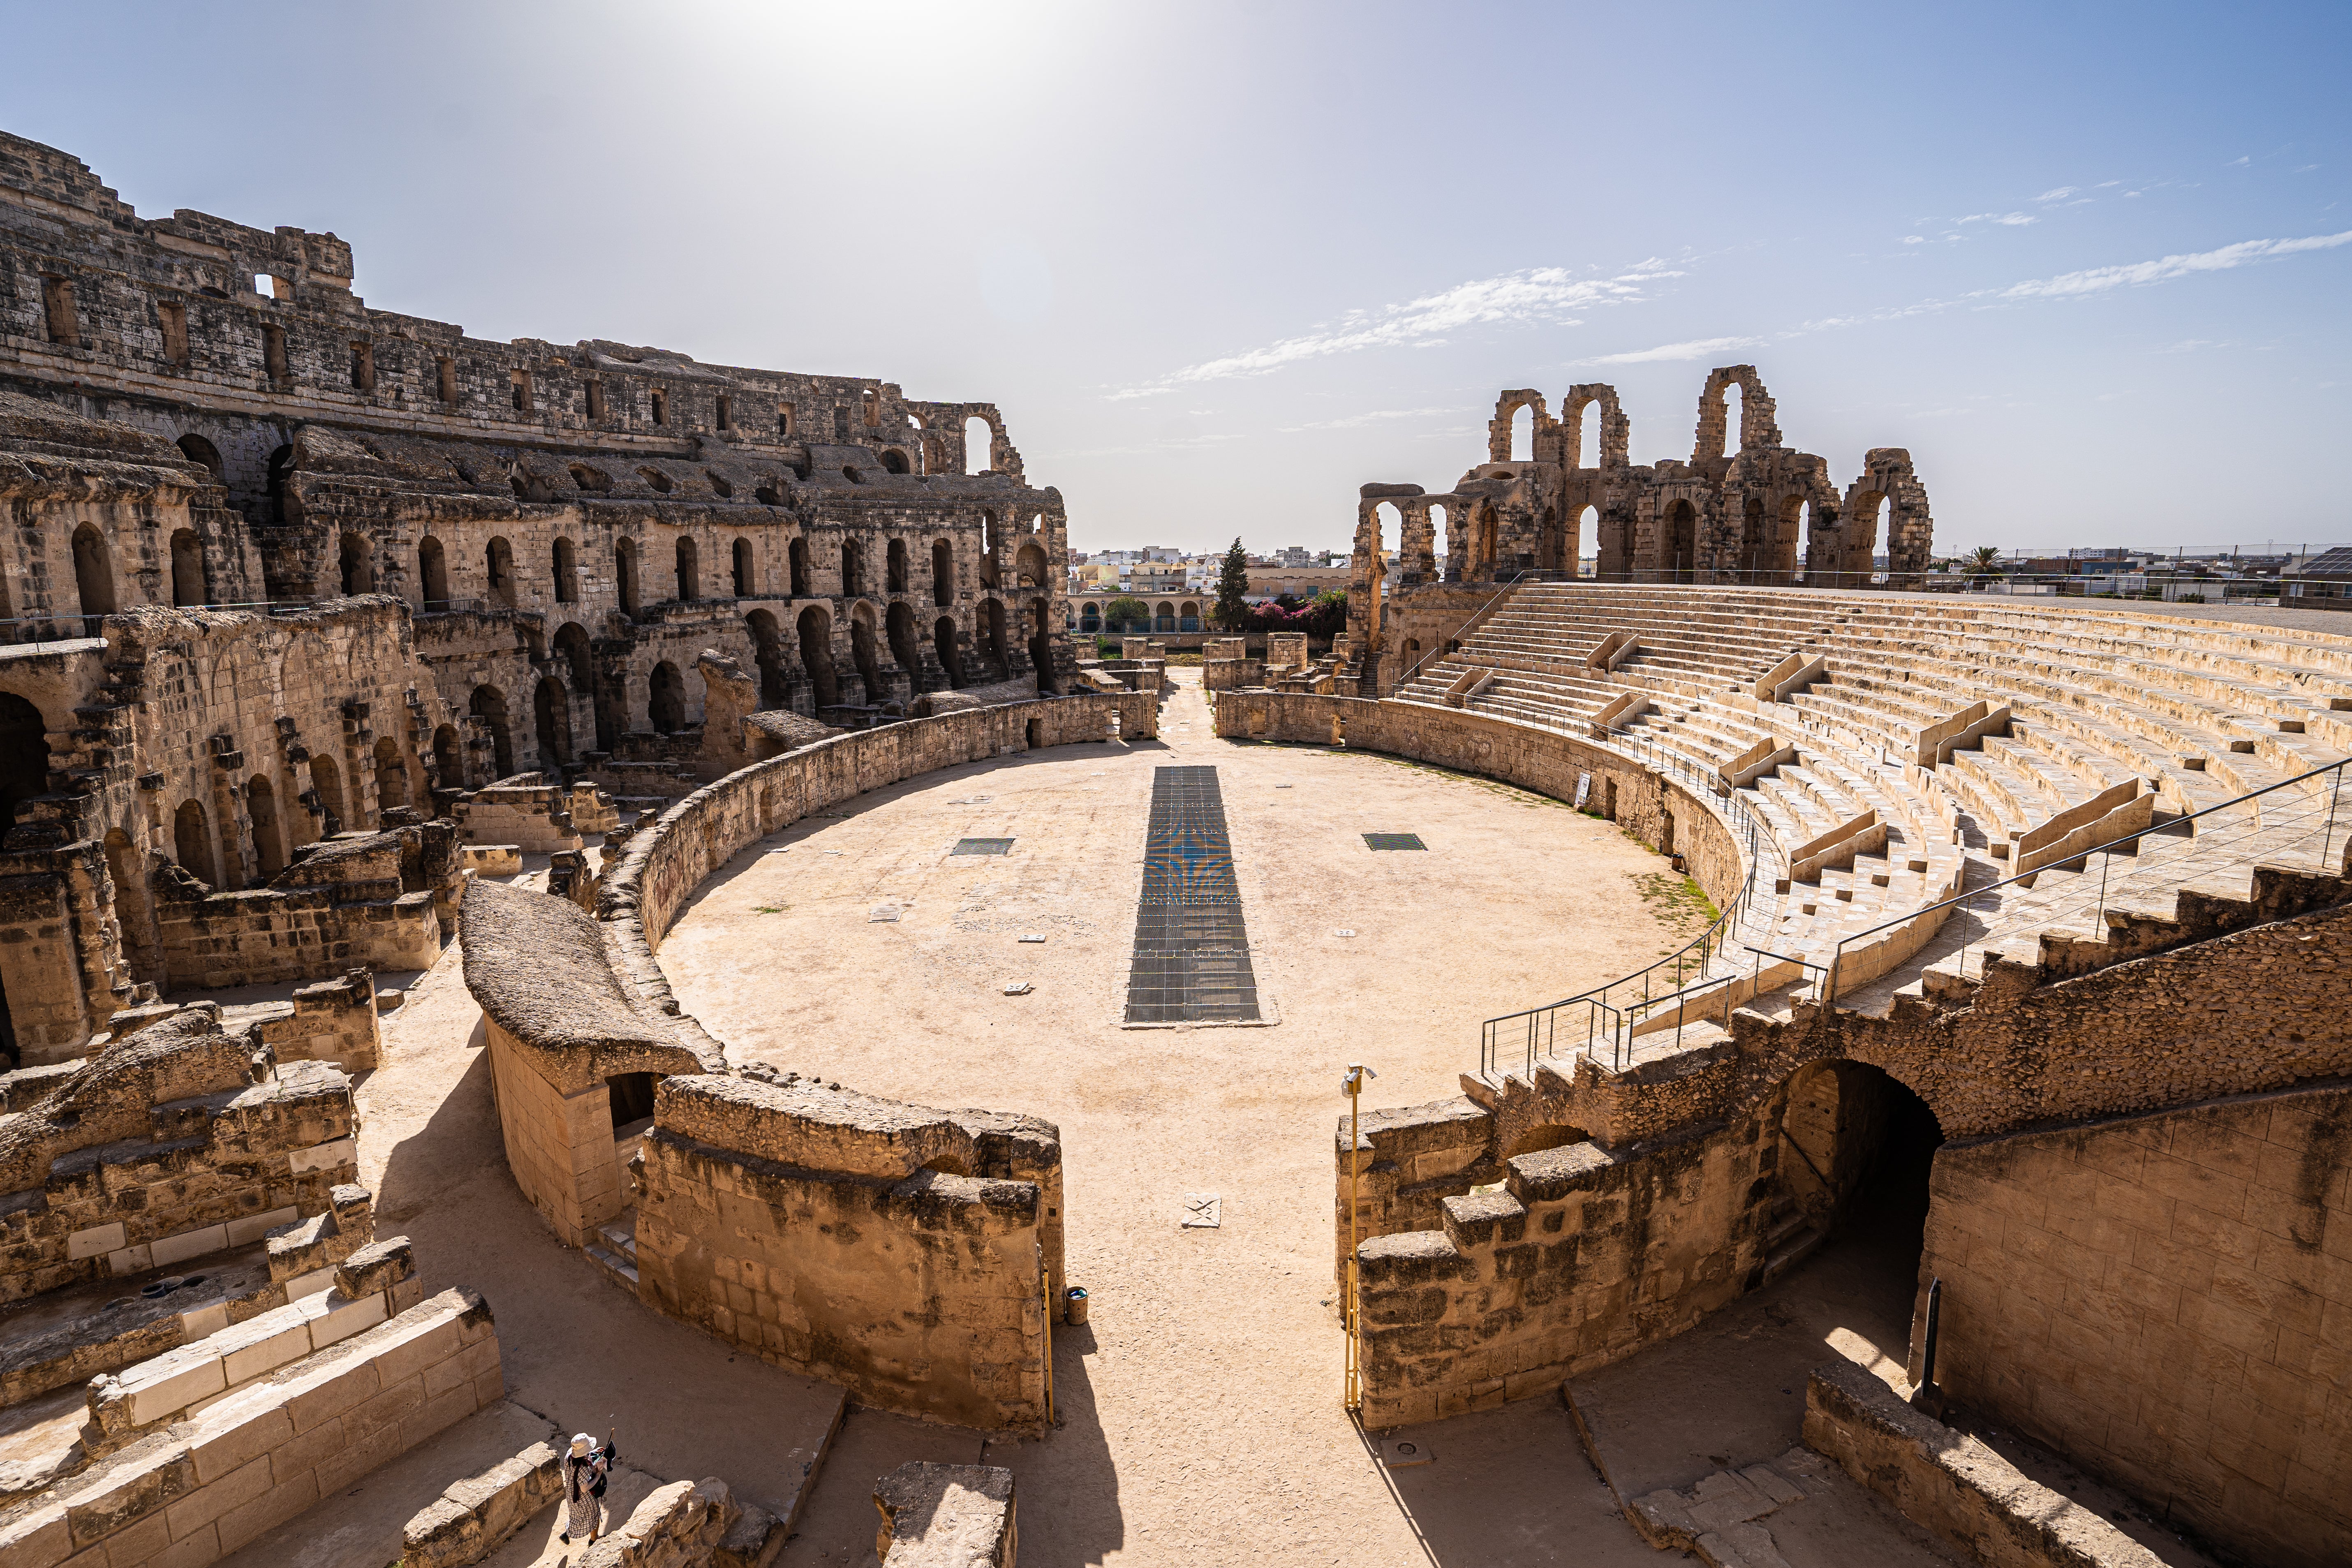 El Jem has survived countless earthquakes and conflicts over the centuries